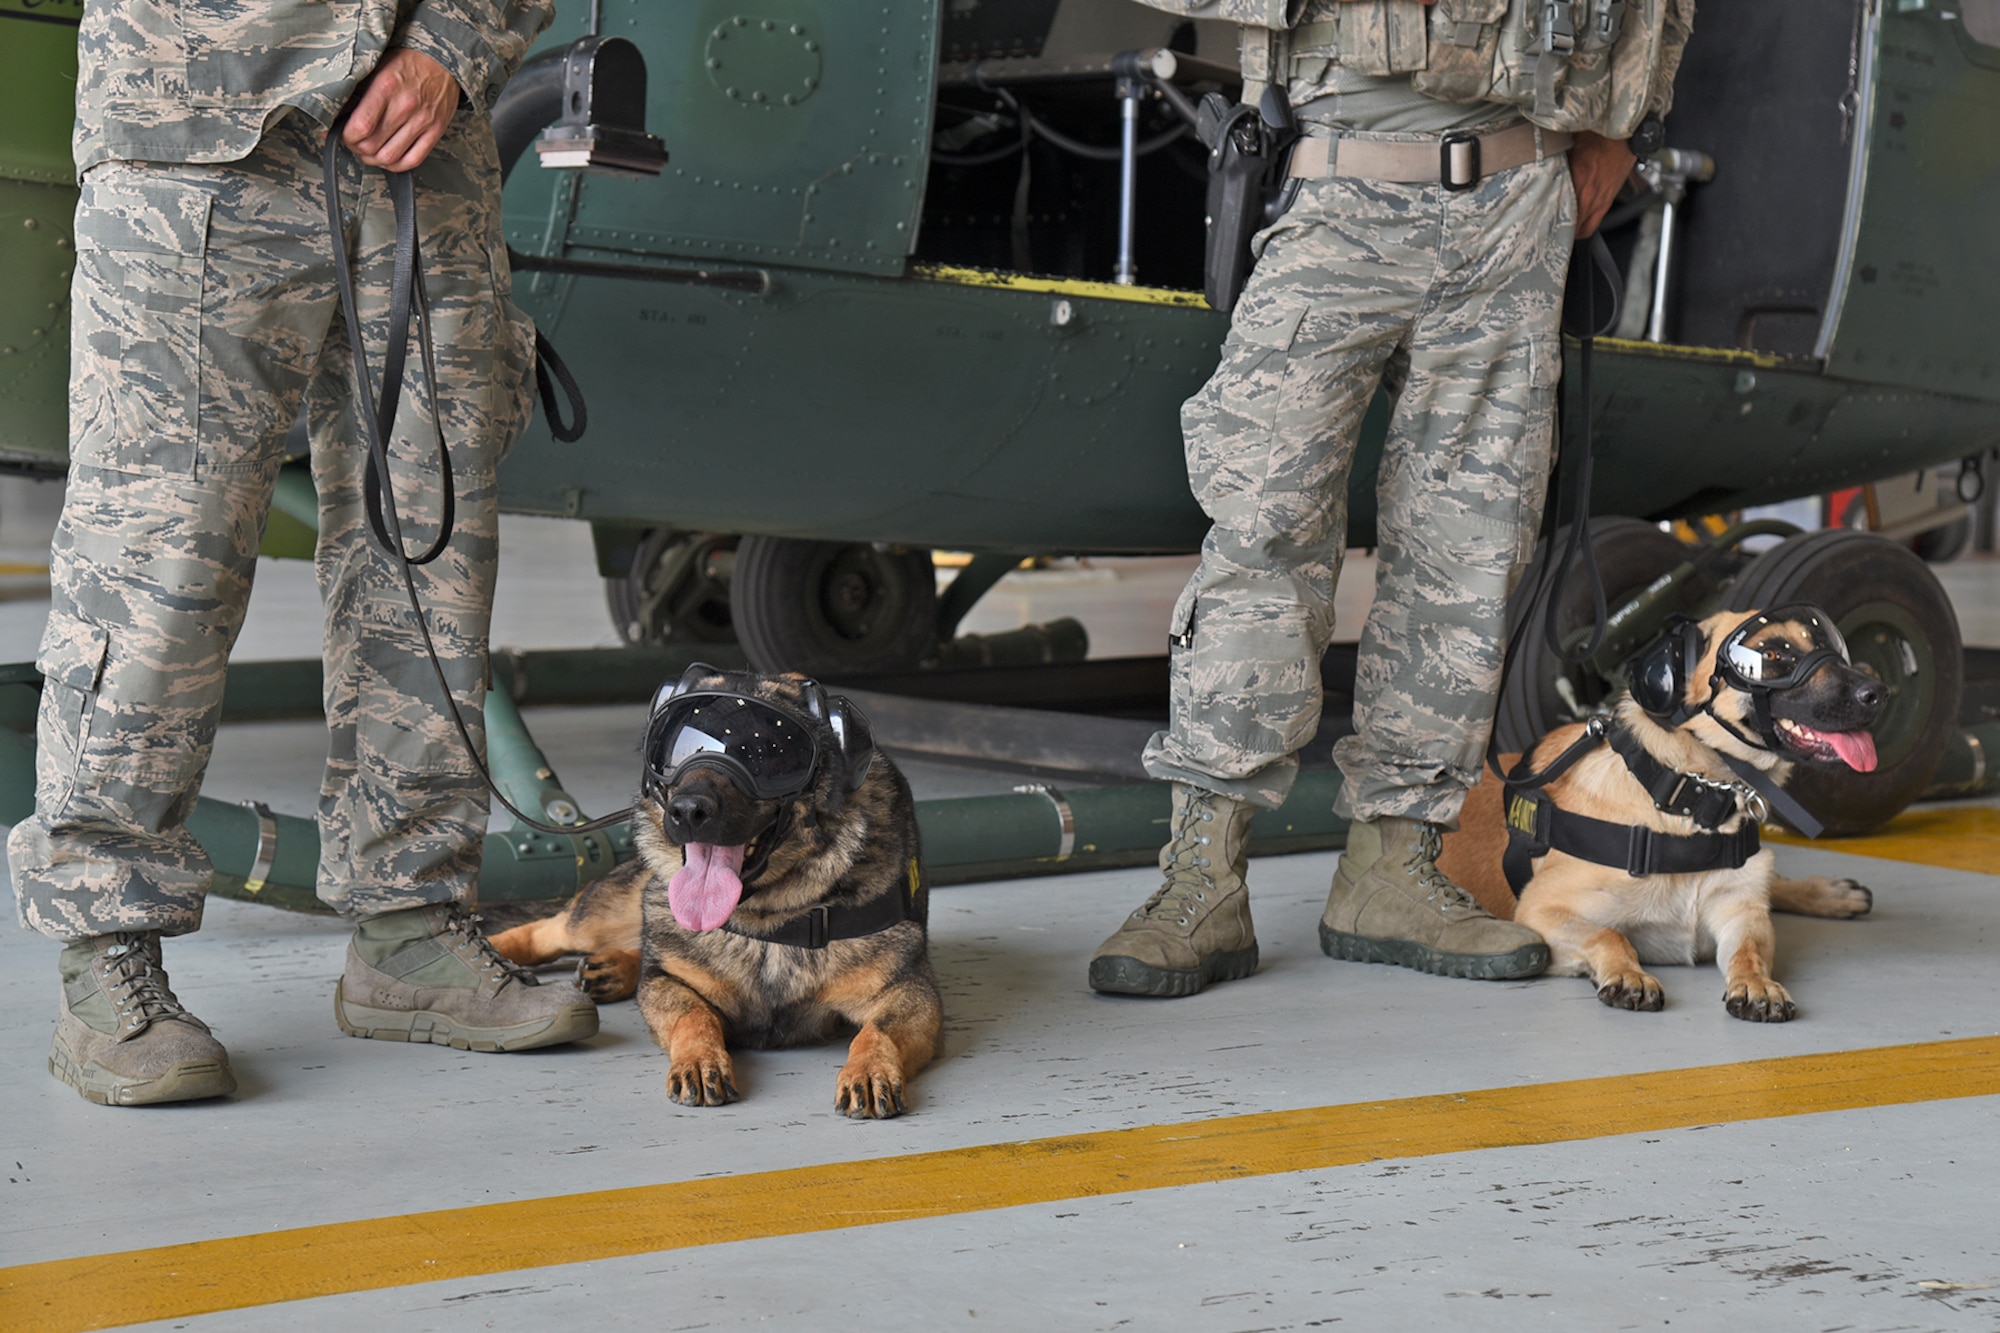 Military Working Dogs Brenda and Lili go through huey familiarization training with their handlers Aug. 14, 2018, at Fairchild Air Force Base, Washington. The helicopter training gave the 92nd Security Forces Squadron MWD section an opportunity to prepare for various deployment missions that may require prior huey knowledge or experience. (U.S. Air Force photo/Staff Sgt. Mackenzie Mendez)